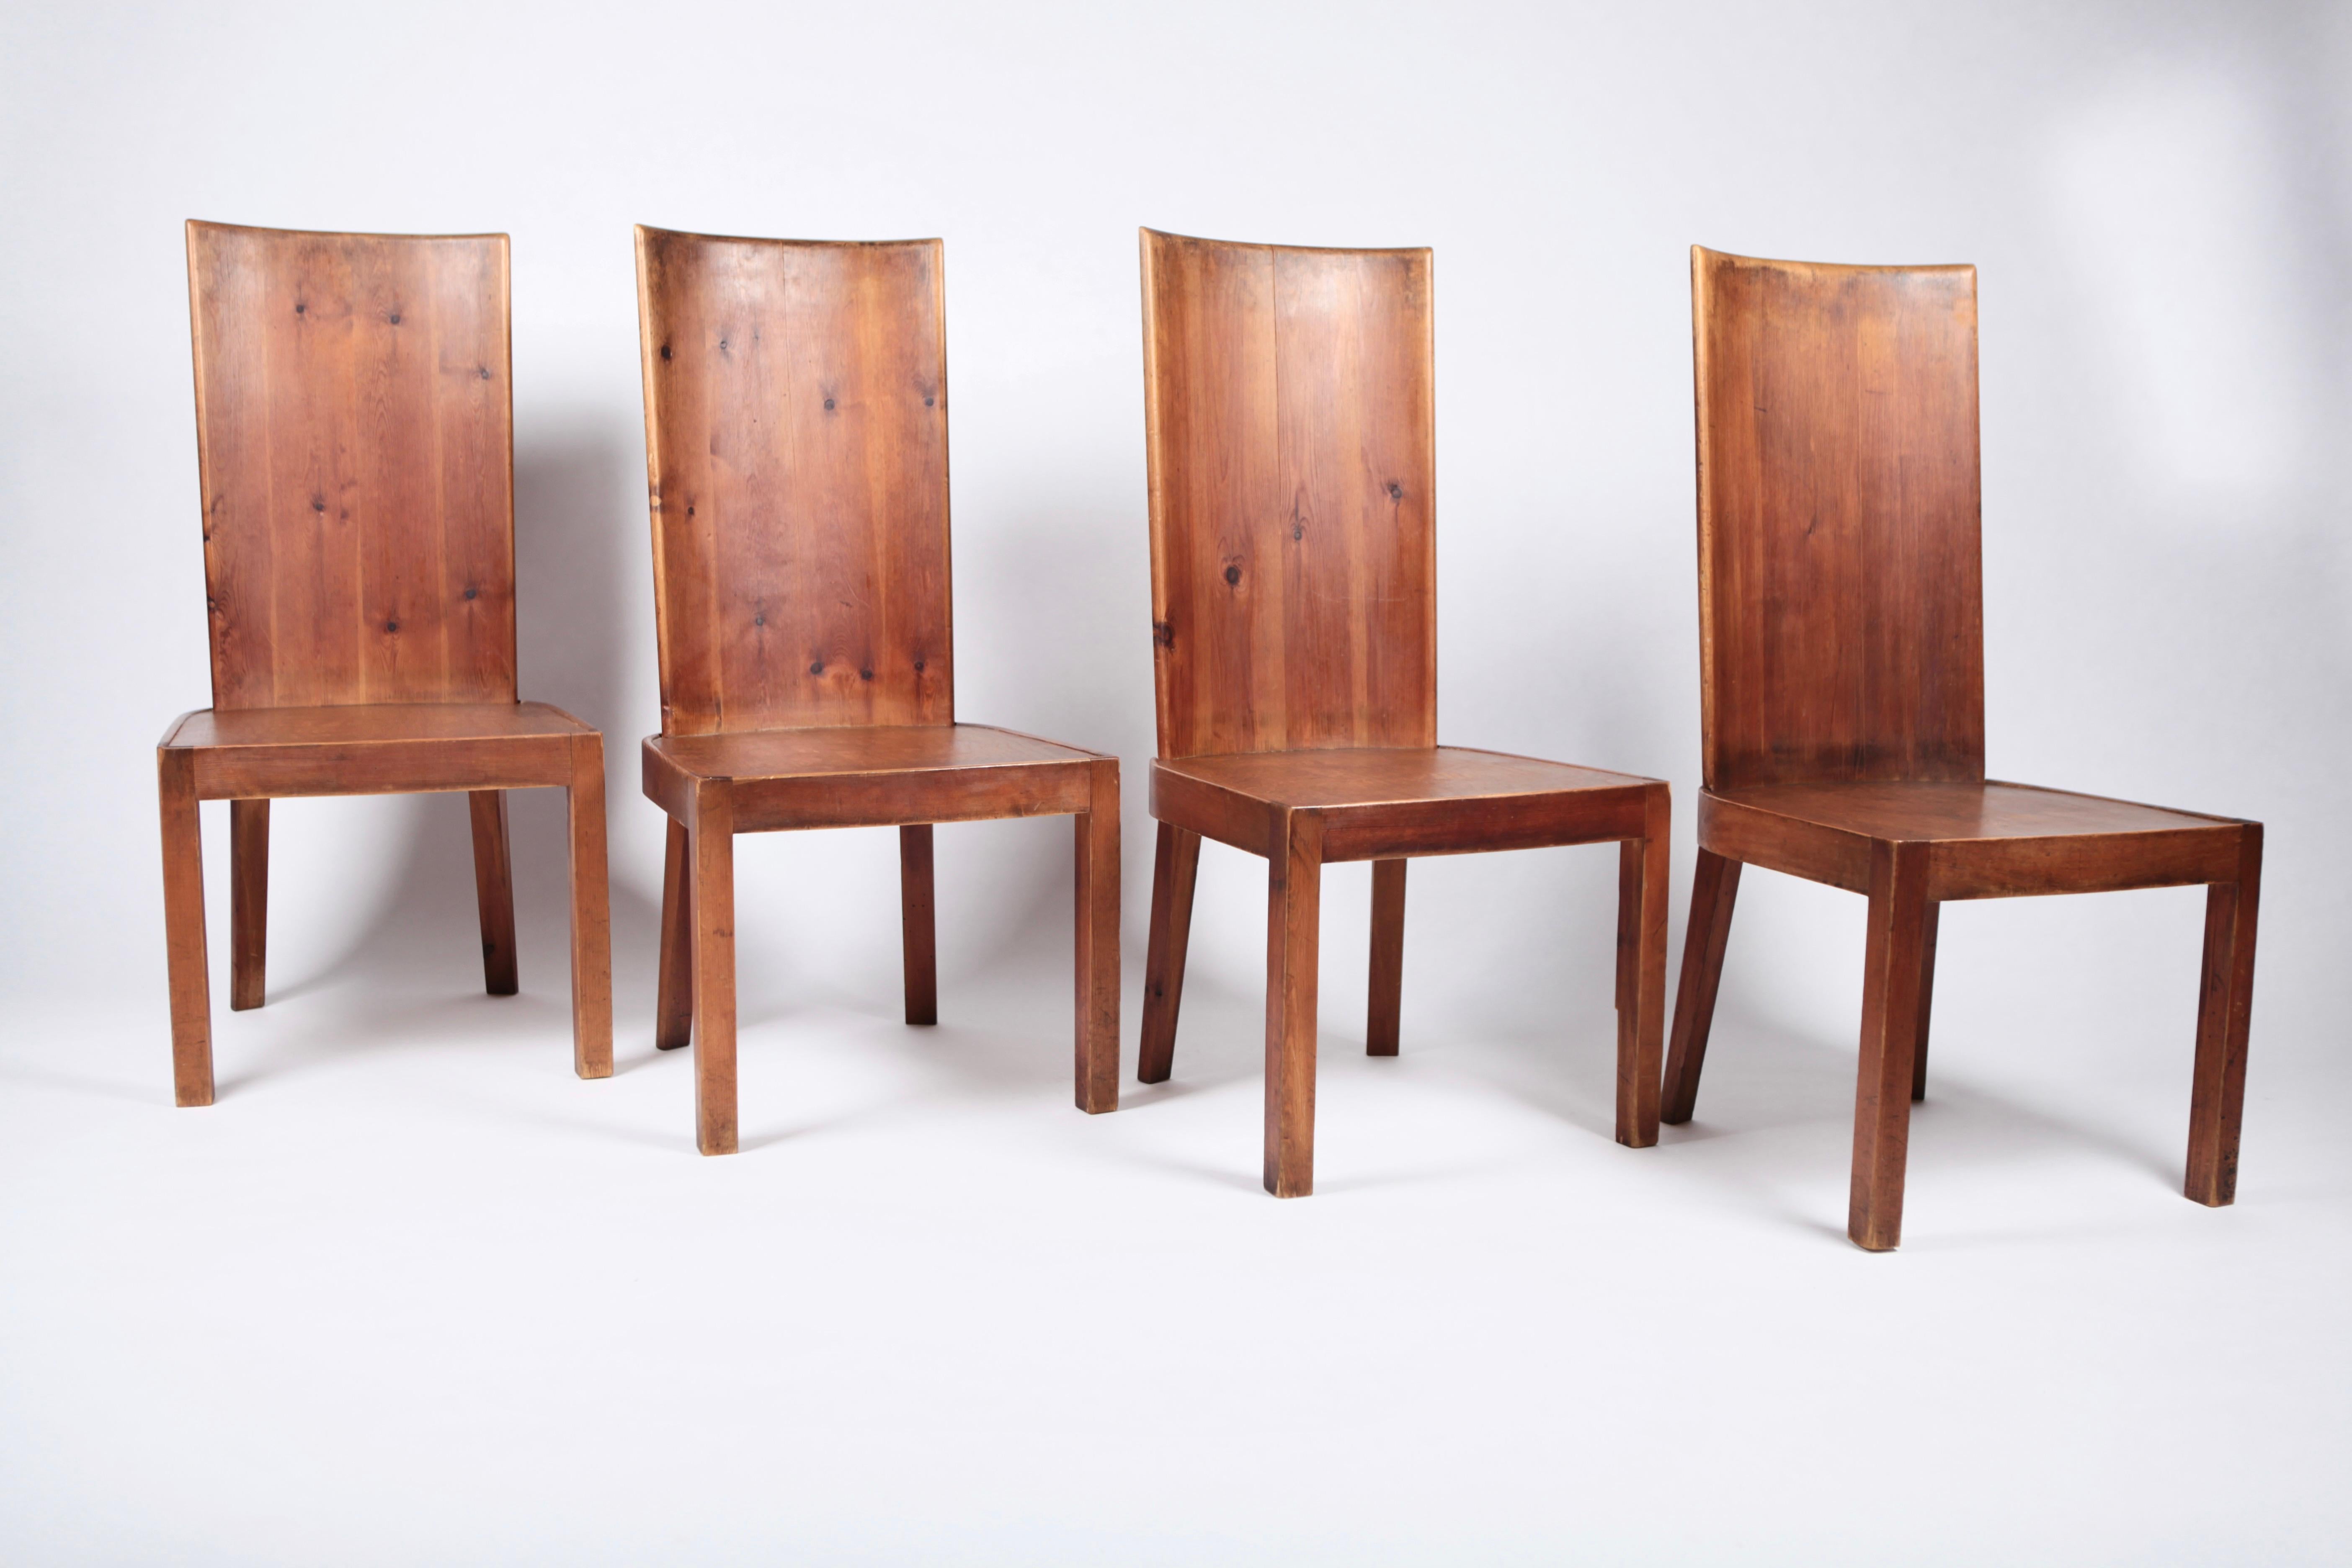 Set of 4 High Back Stained Pine Chairs, Attributed to Axel Einar Hjorth, Sweden  For Sale 1